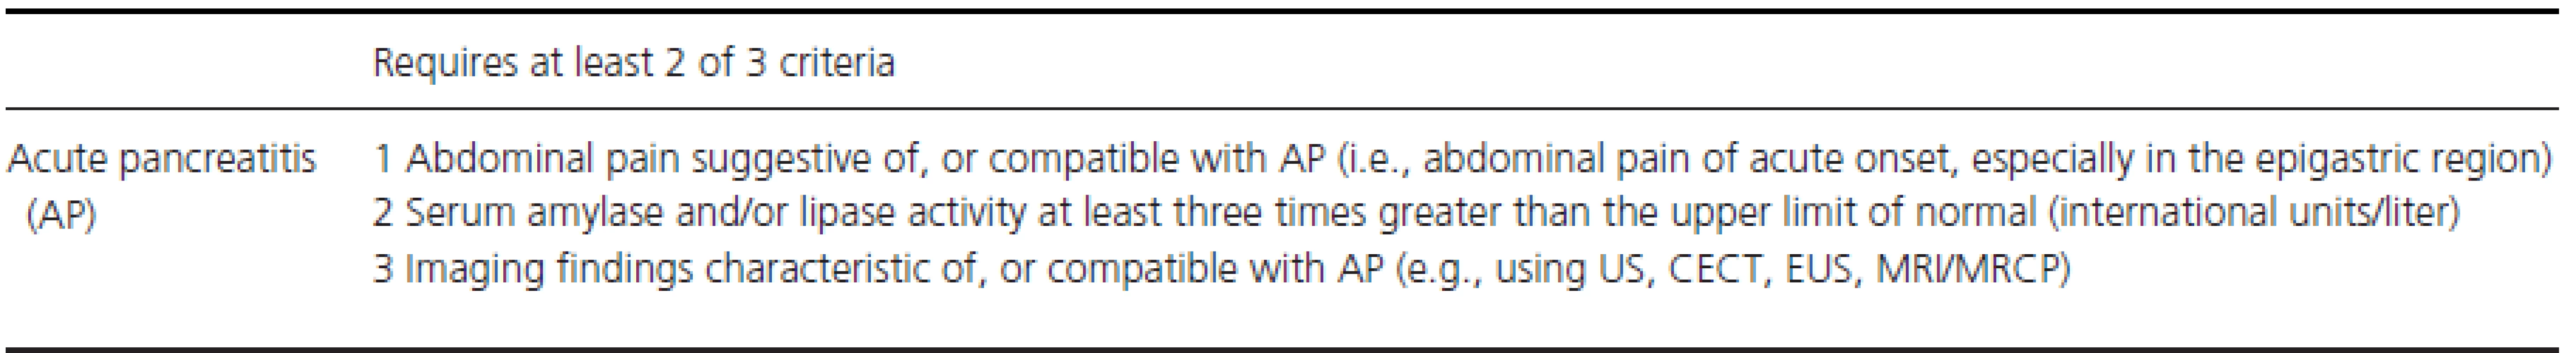 Clinical definition of AP in children [7].